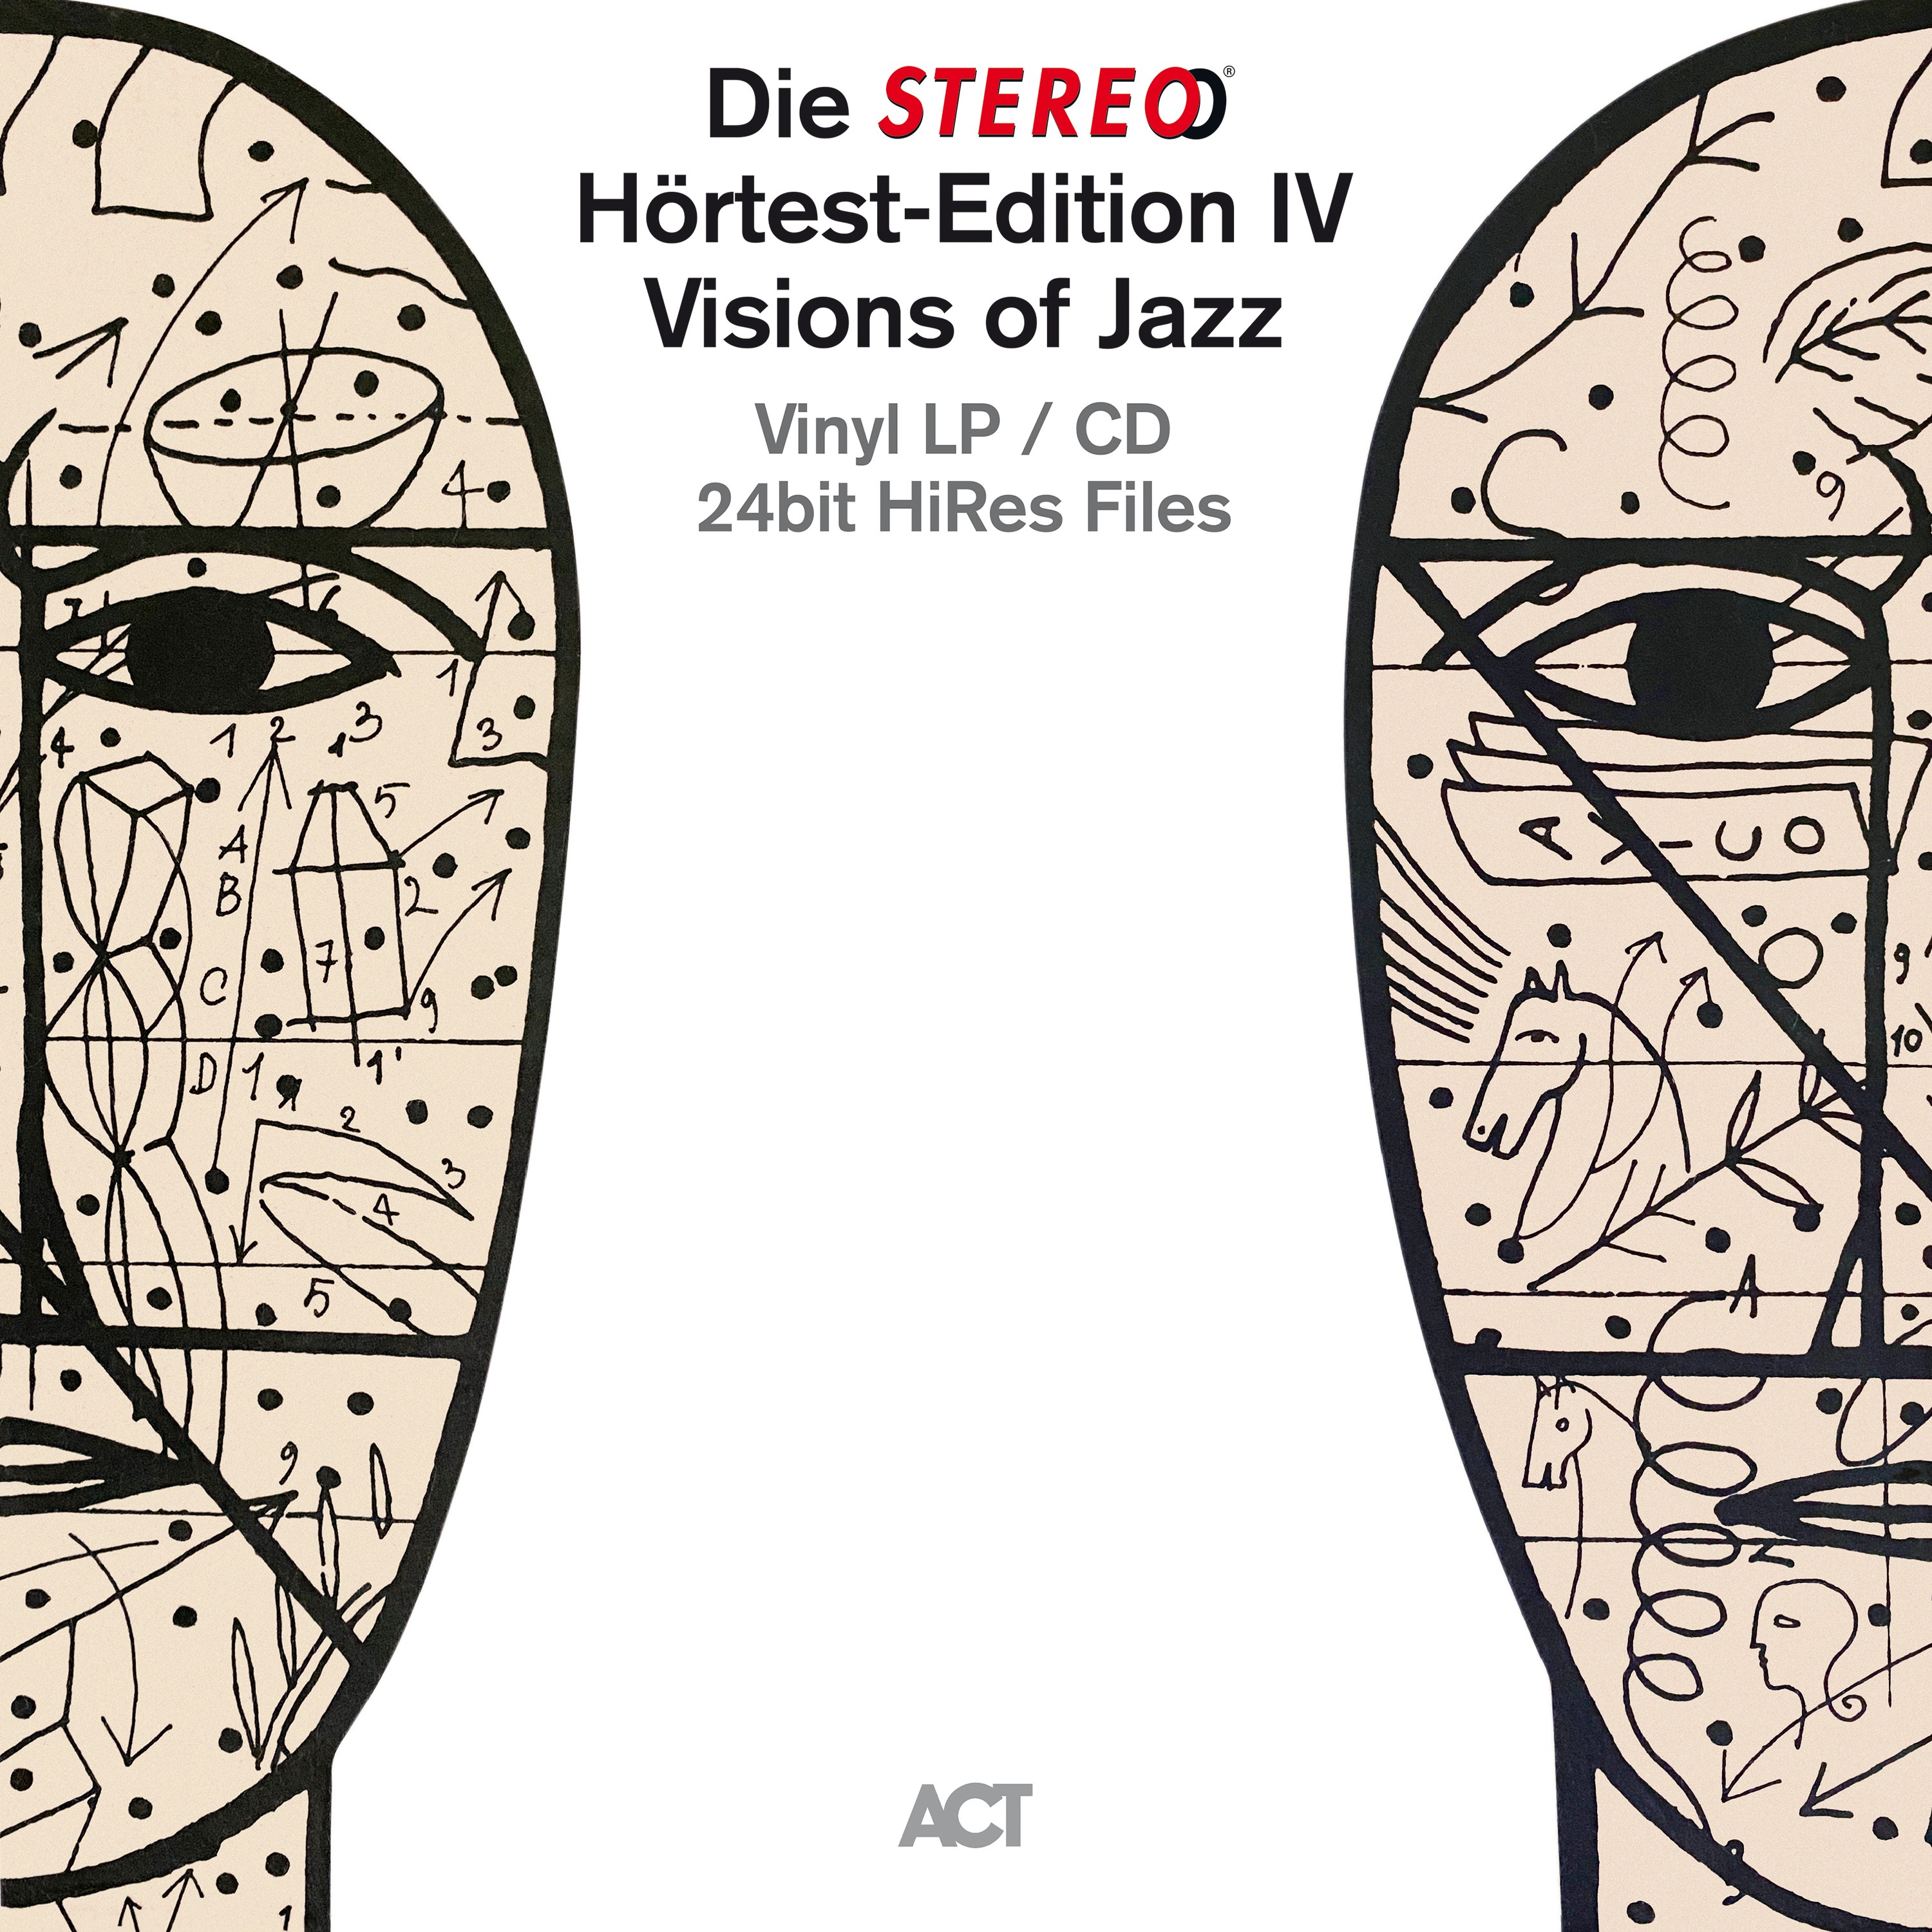 Die STEREO Hörtest-Edition Vol. IV "Visions of jazz"